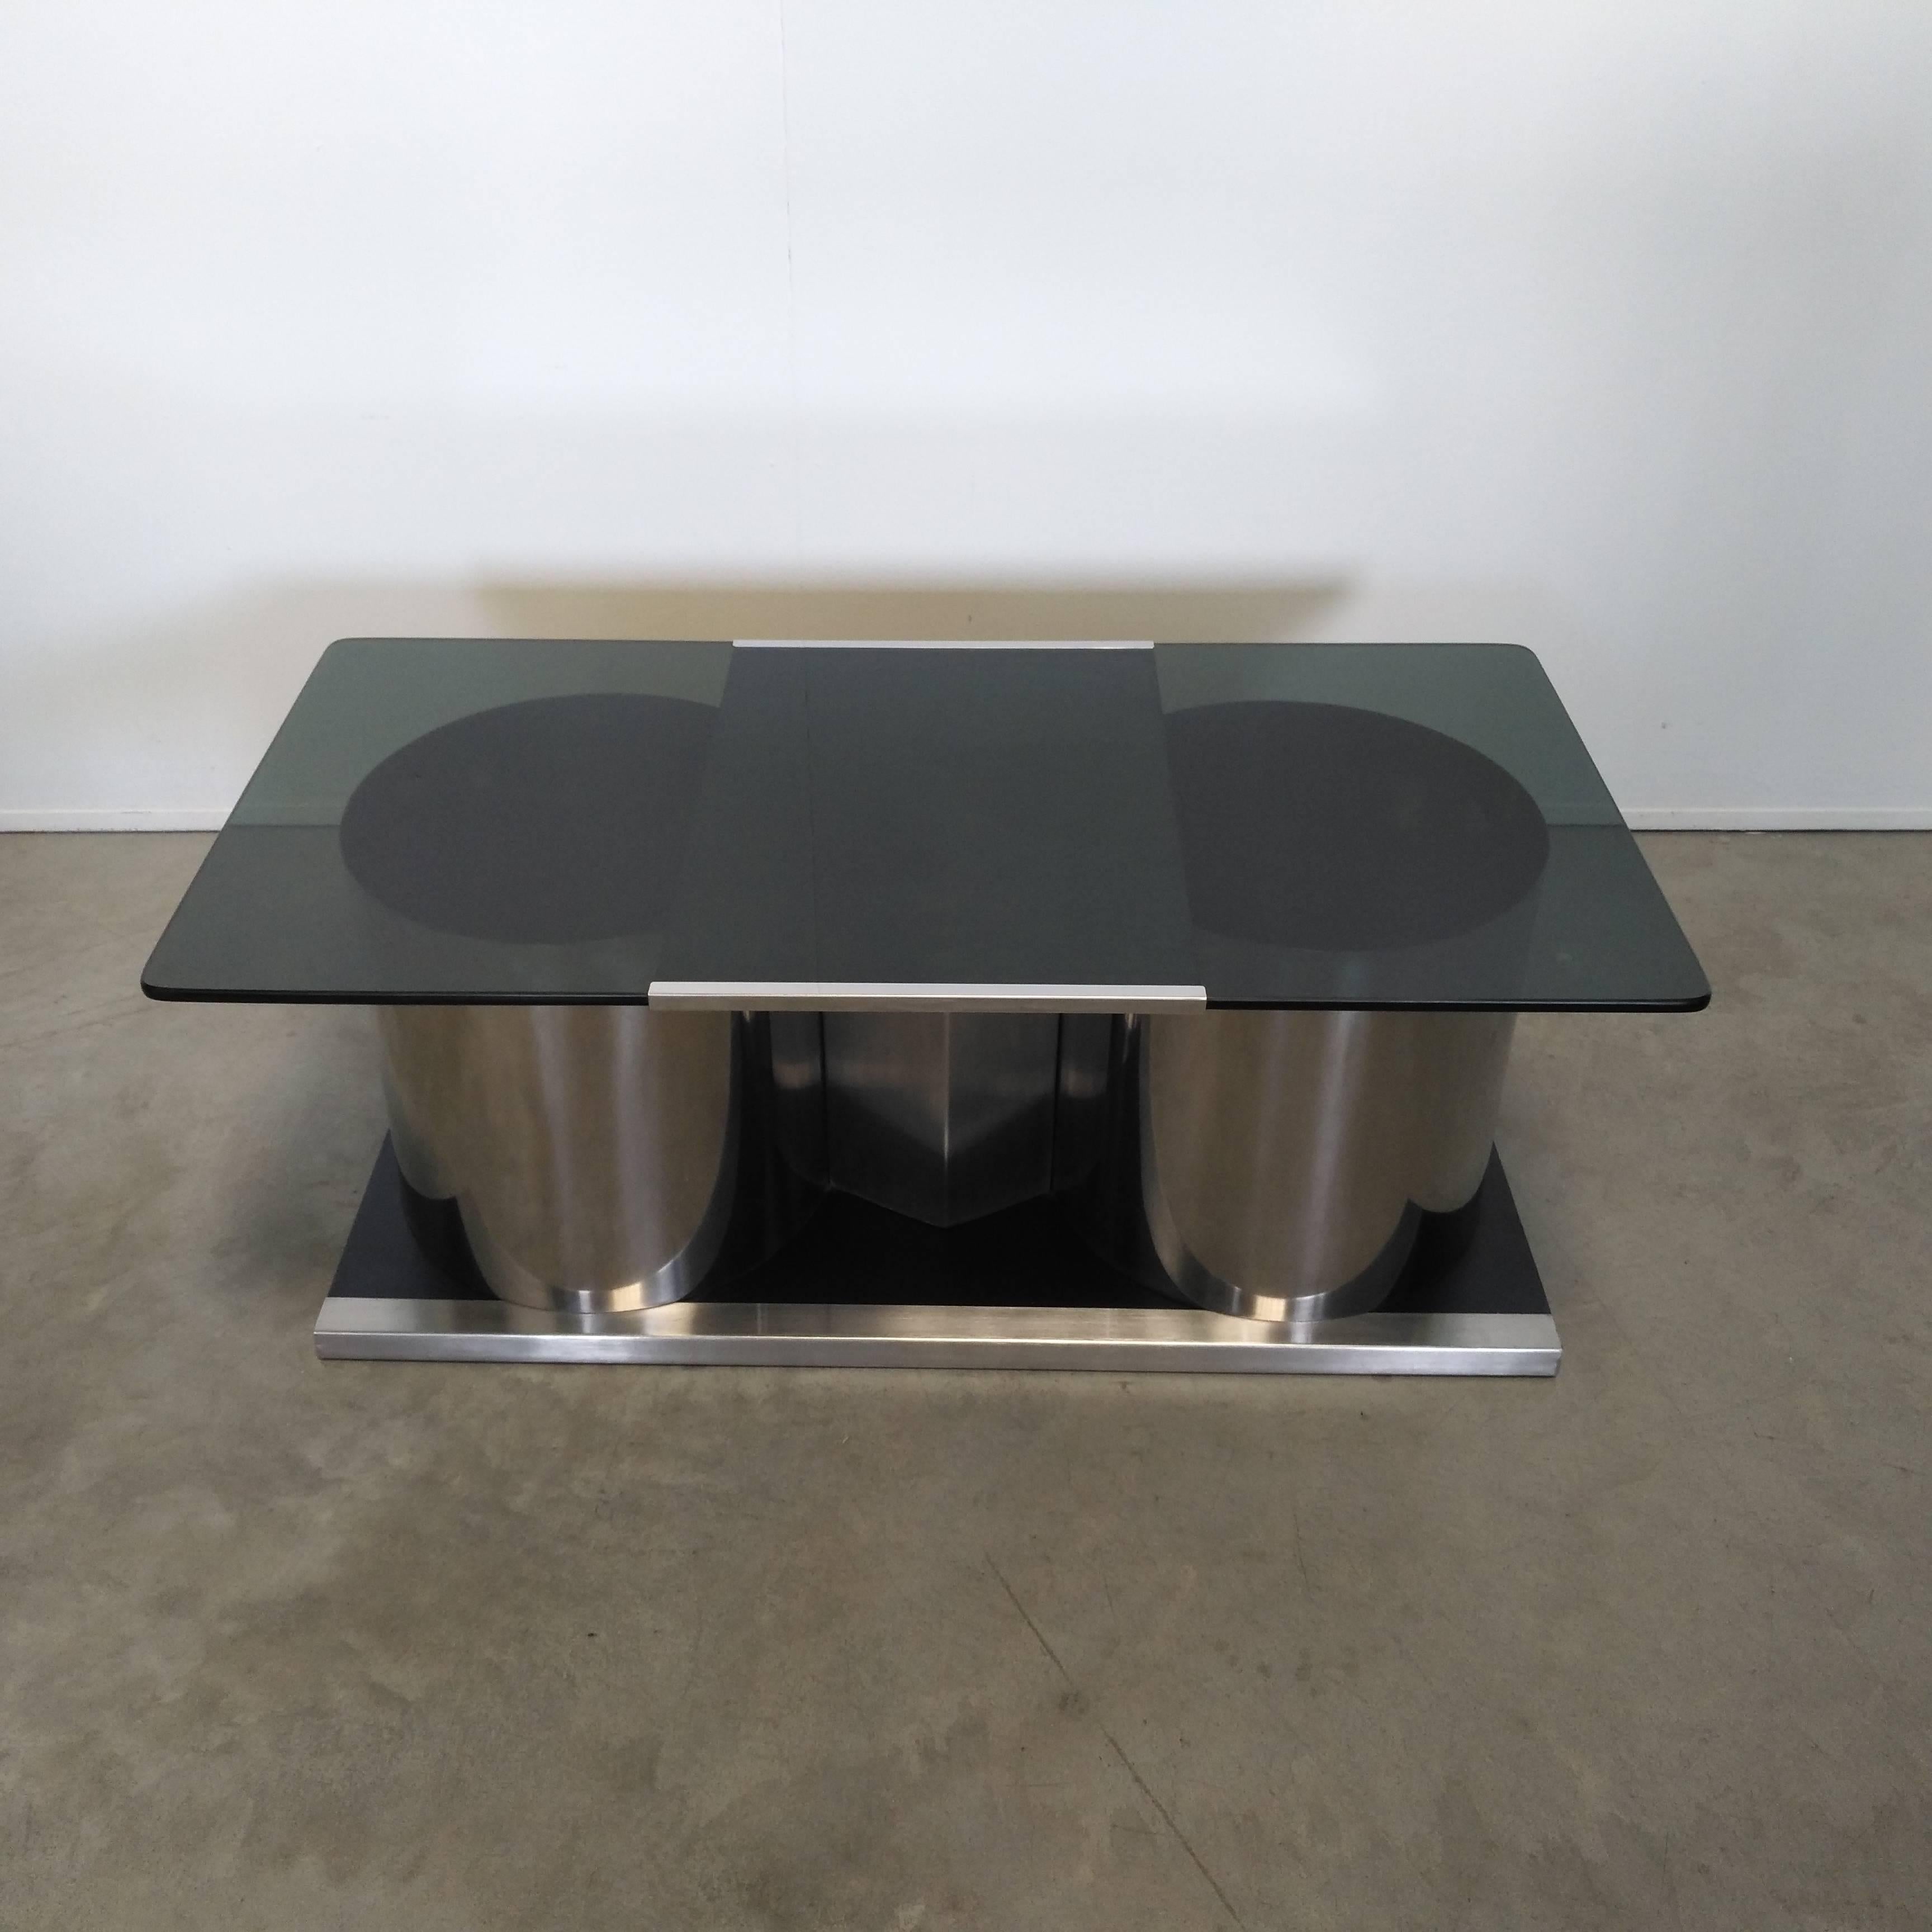 Beautiful coffee table, blue lacquered base with steel columns surmounted by a swivel glass top to hid the bar inside the cylindrical columns, exceptional design and good manufacturing, designed by Francois Monnet in 1970.